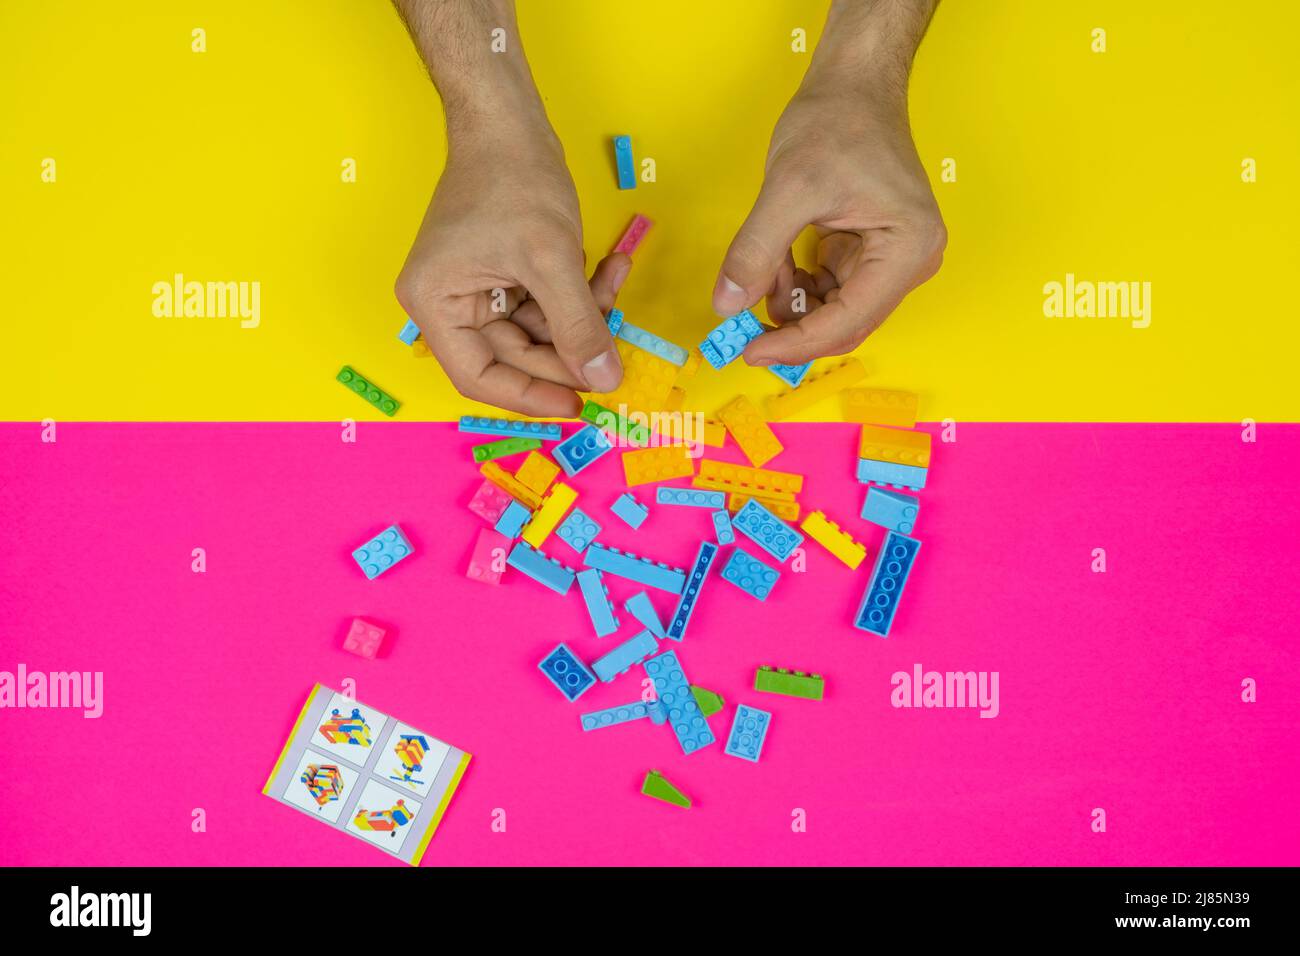 Hand playing with colorful lego blocks toy, colored background, top view, playing and learning concept, bunch of lego block, spilled kid toys Stock Photo